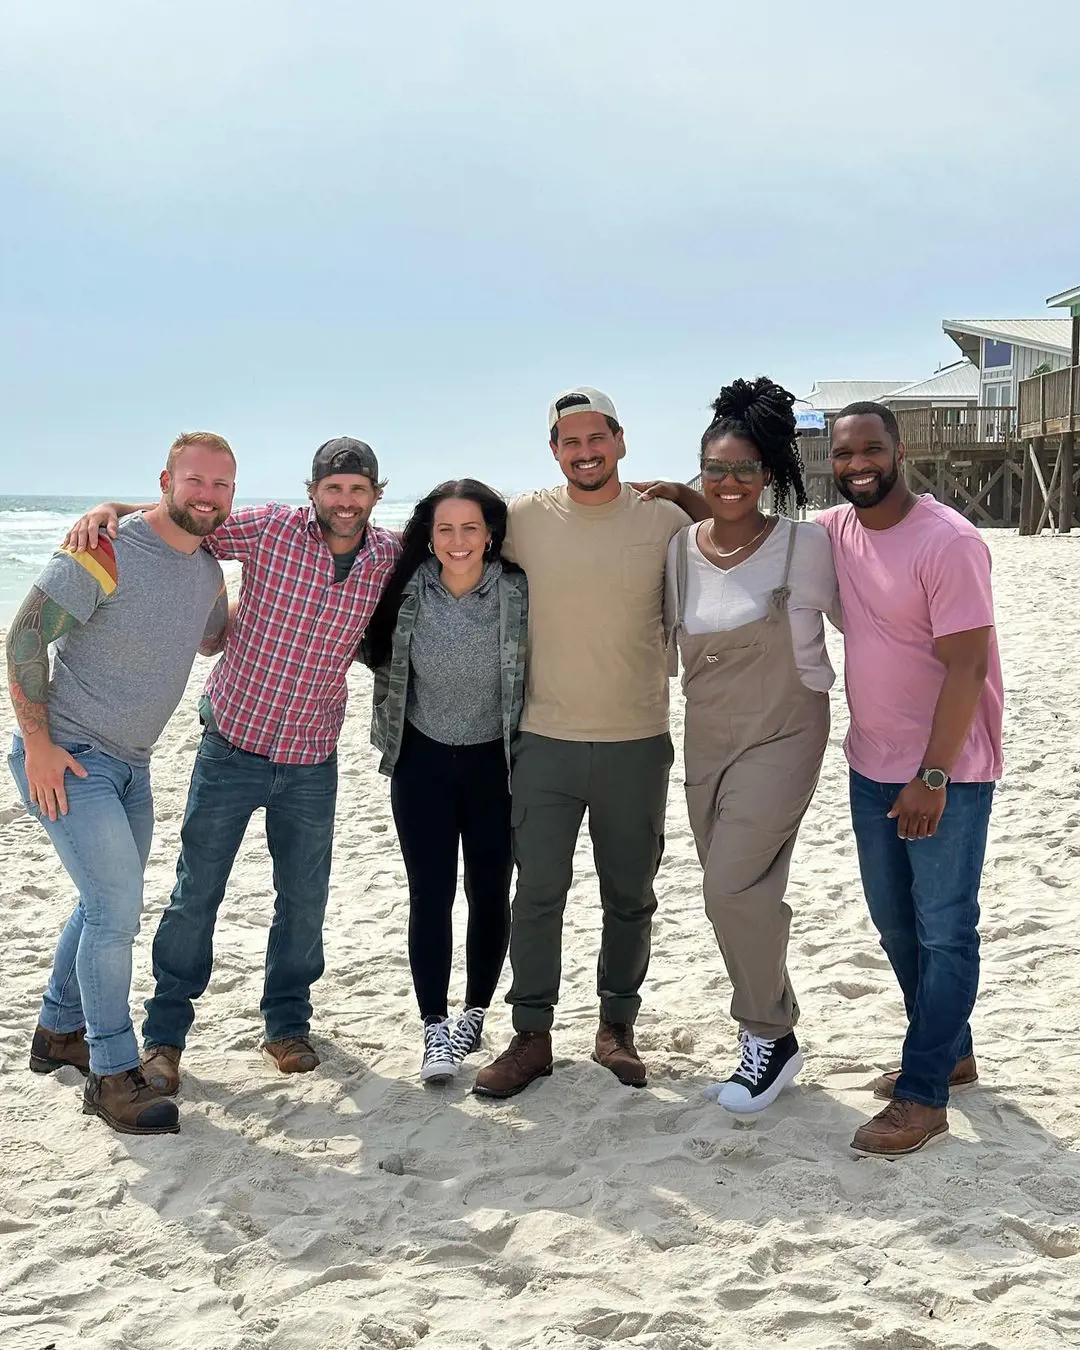 The six contestants from the three teams of the HGTV reality competition show Battle on the Beach